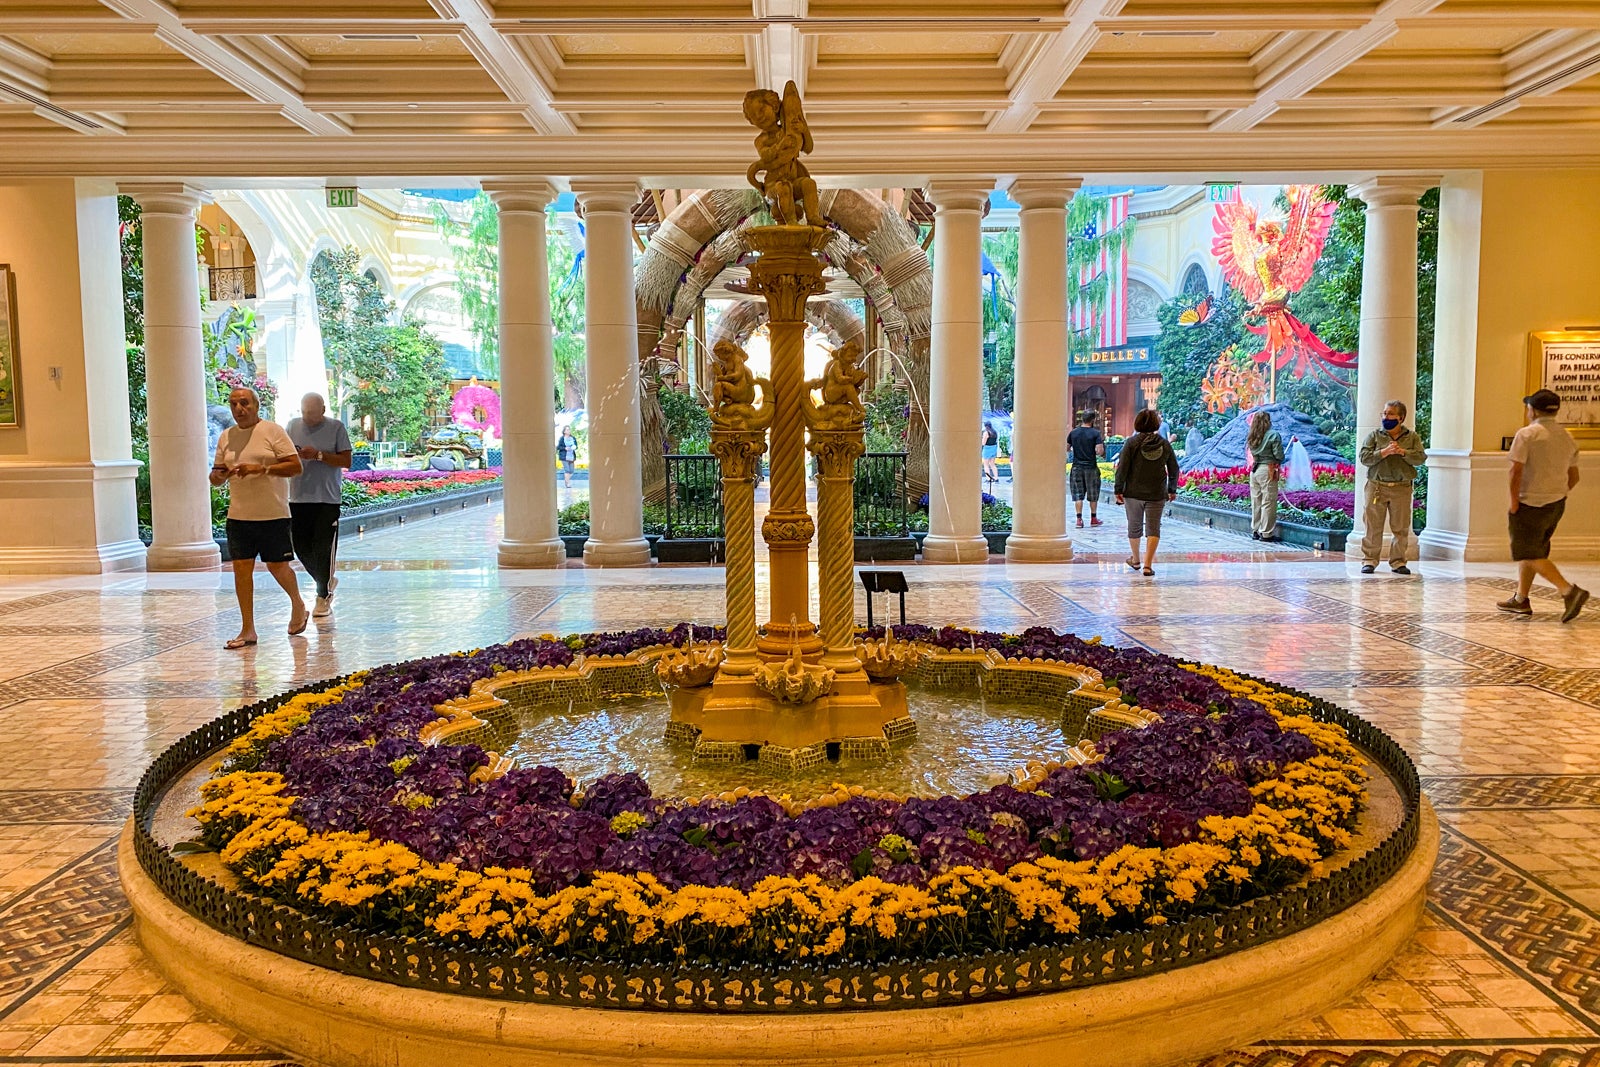 Bellagio to Renovate Hotel Rooms, Eyeing Las Vegas Recovery in 2021